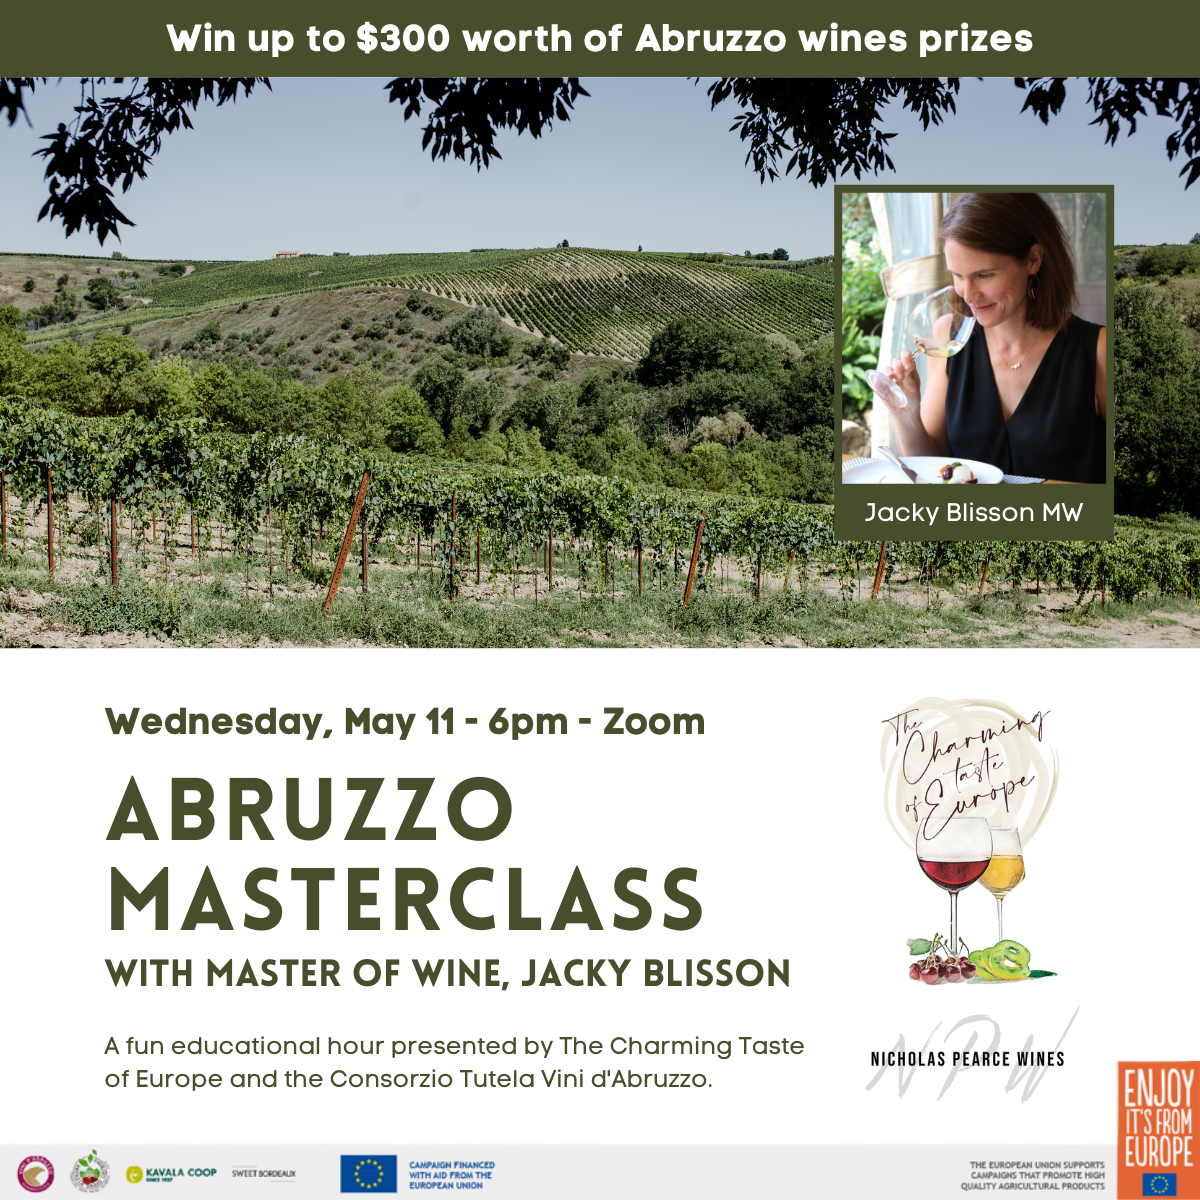 Vineyard image and a woman smelling wine with the following text: Win up to $300 worth of Abruzzo wine prizes! Wednesday, May 11 - 6pm -Zoom. Abruzzo Masterclass with Master of Wine Jacky Blisson. A fun educational hour presented by The Charming Taste of Europe and the Consorzio Tuetela Vini d'Abruzzo. 